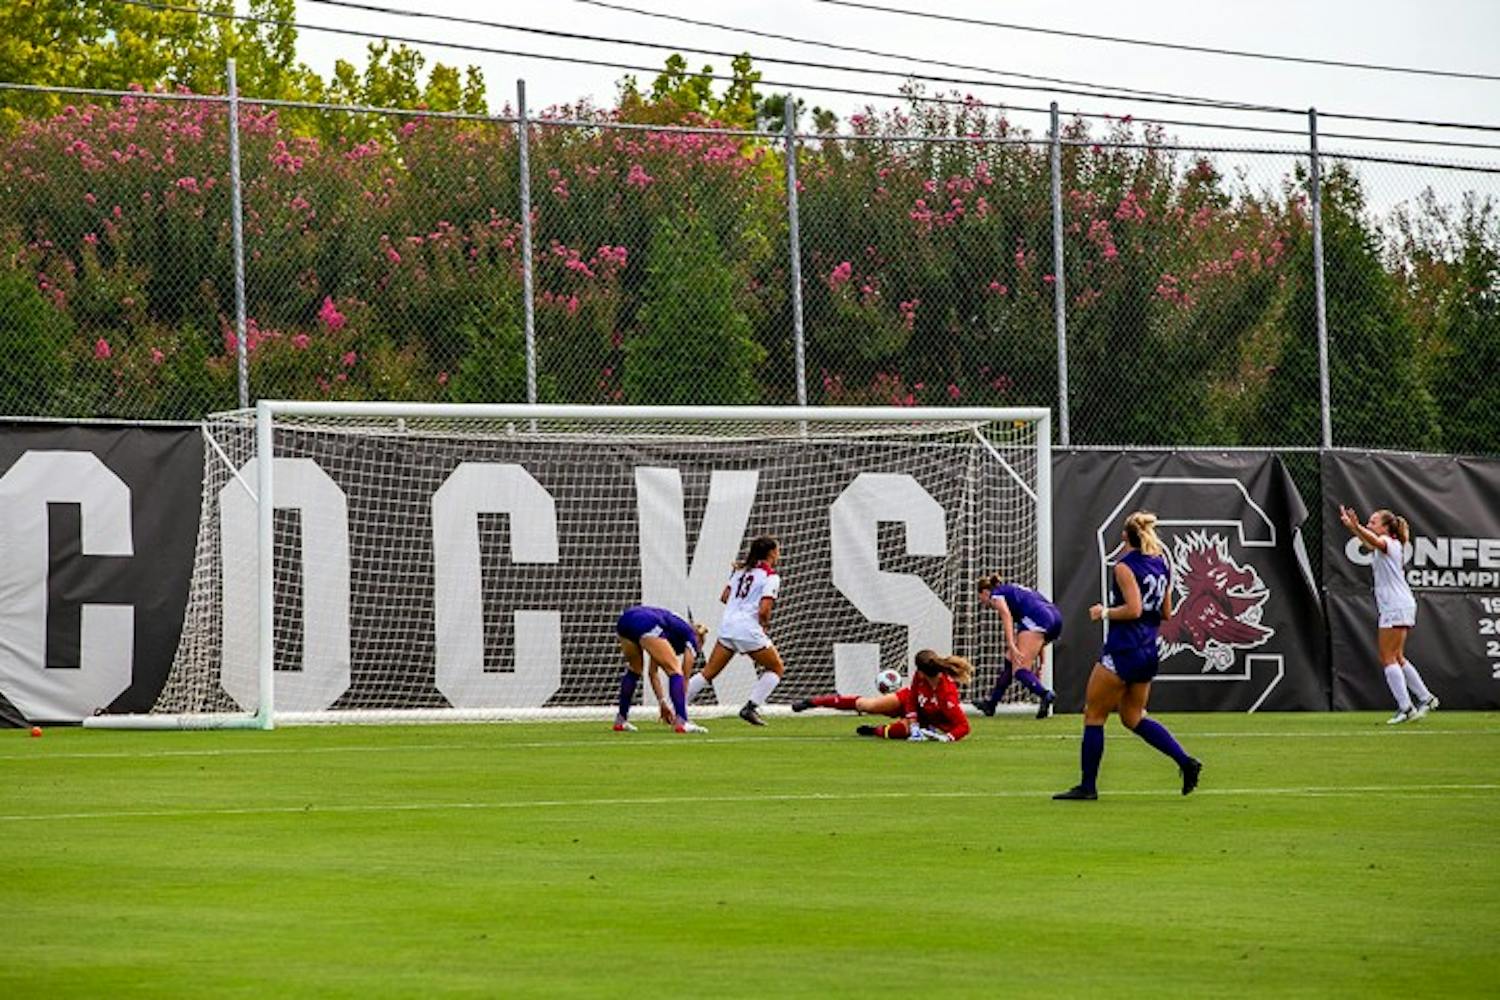 The No. 12 South Carolina women's soccer team earned its first victory of the 鶹С򽴫ý on Sunday afternoon, defeating East Carolina 2-0 at Stone Stadium.